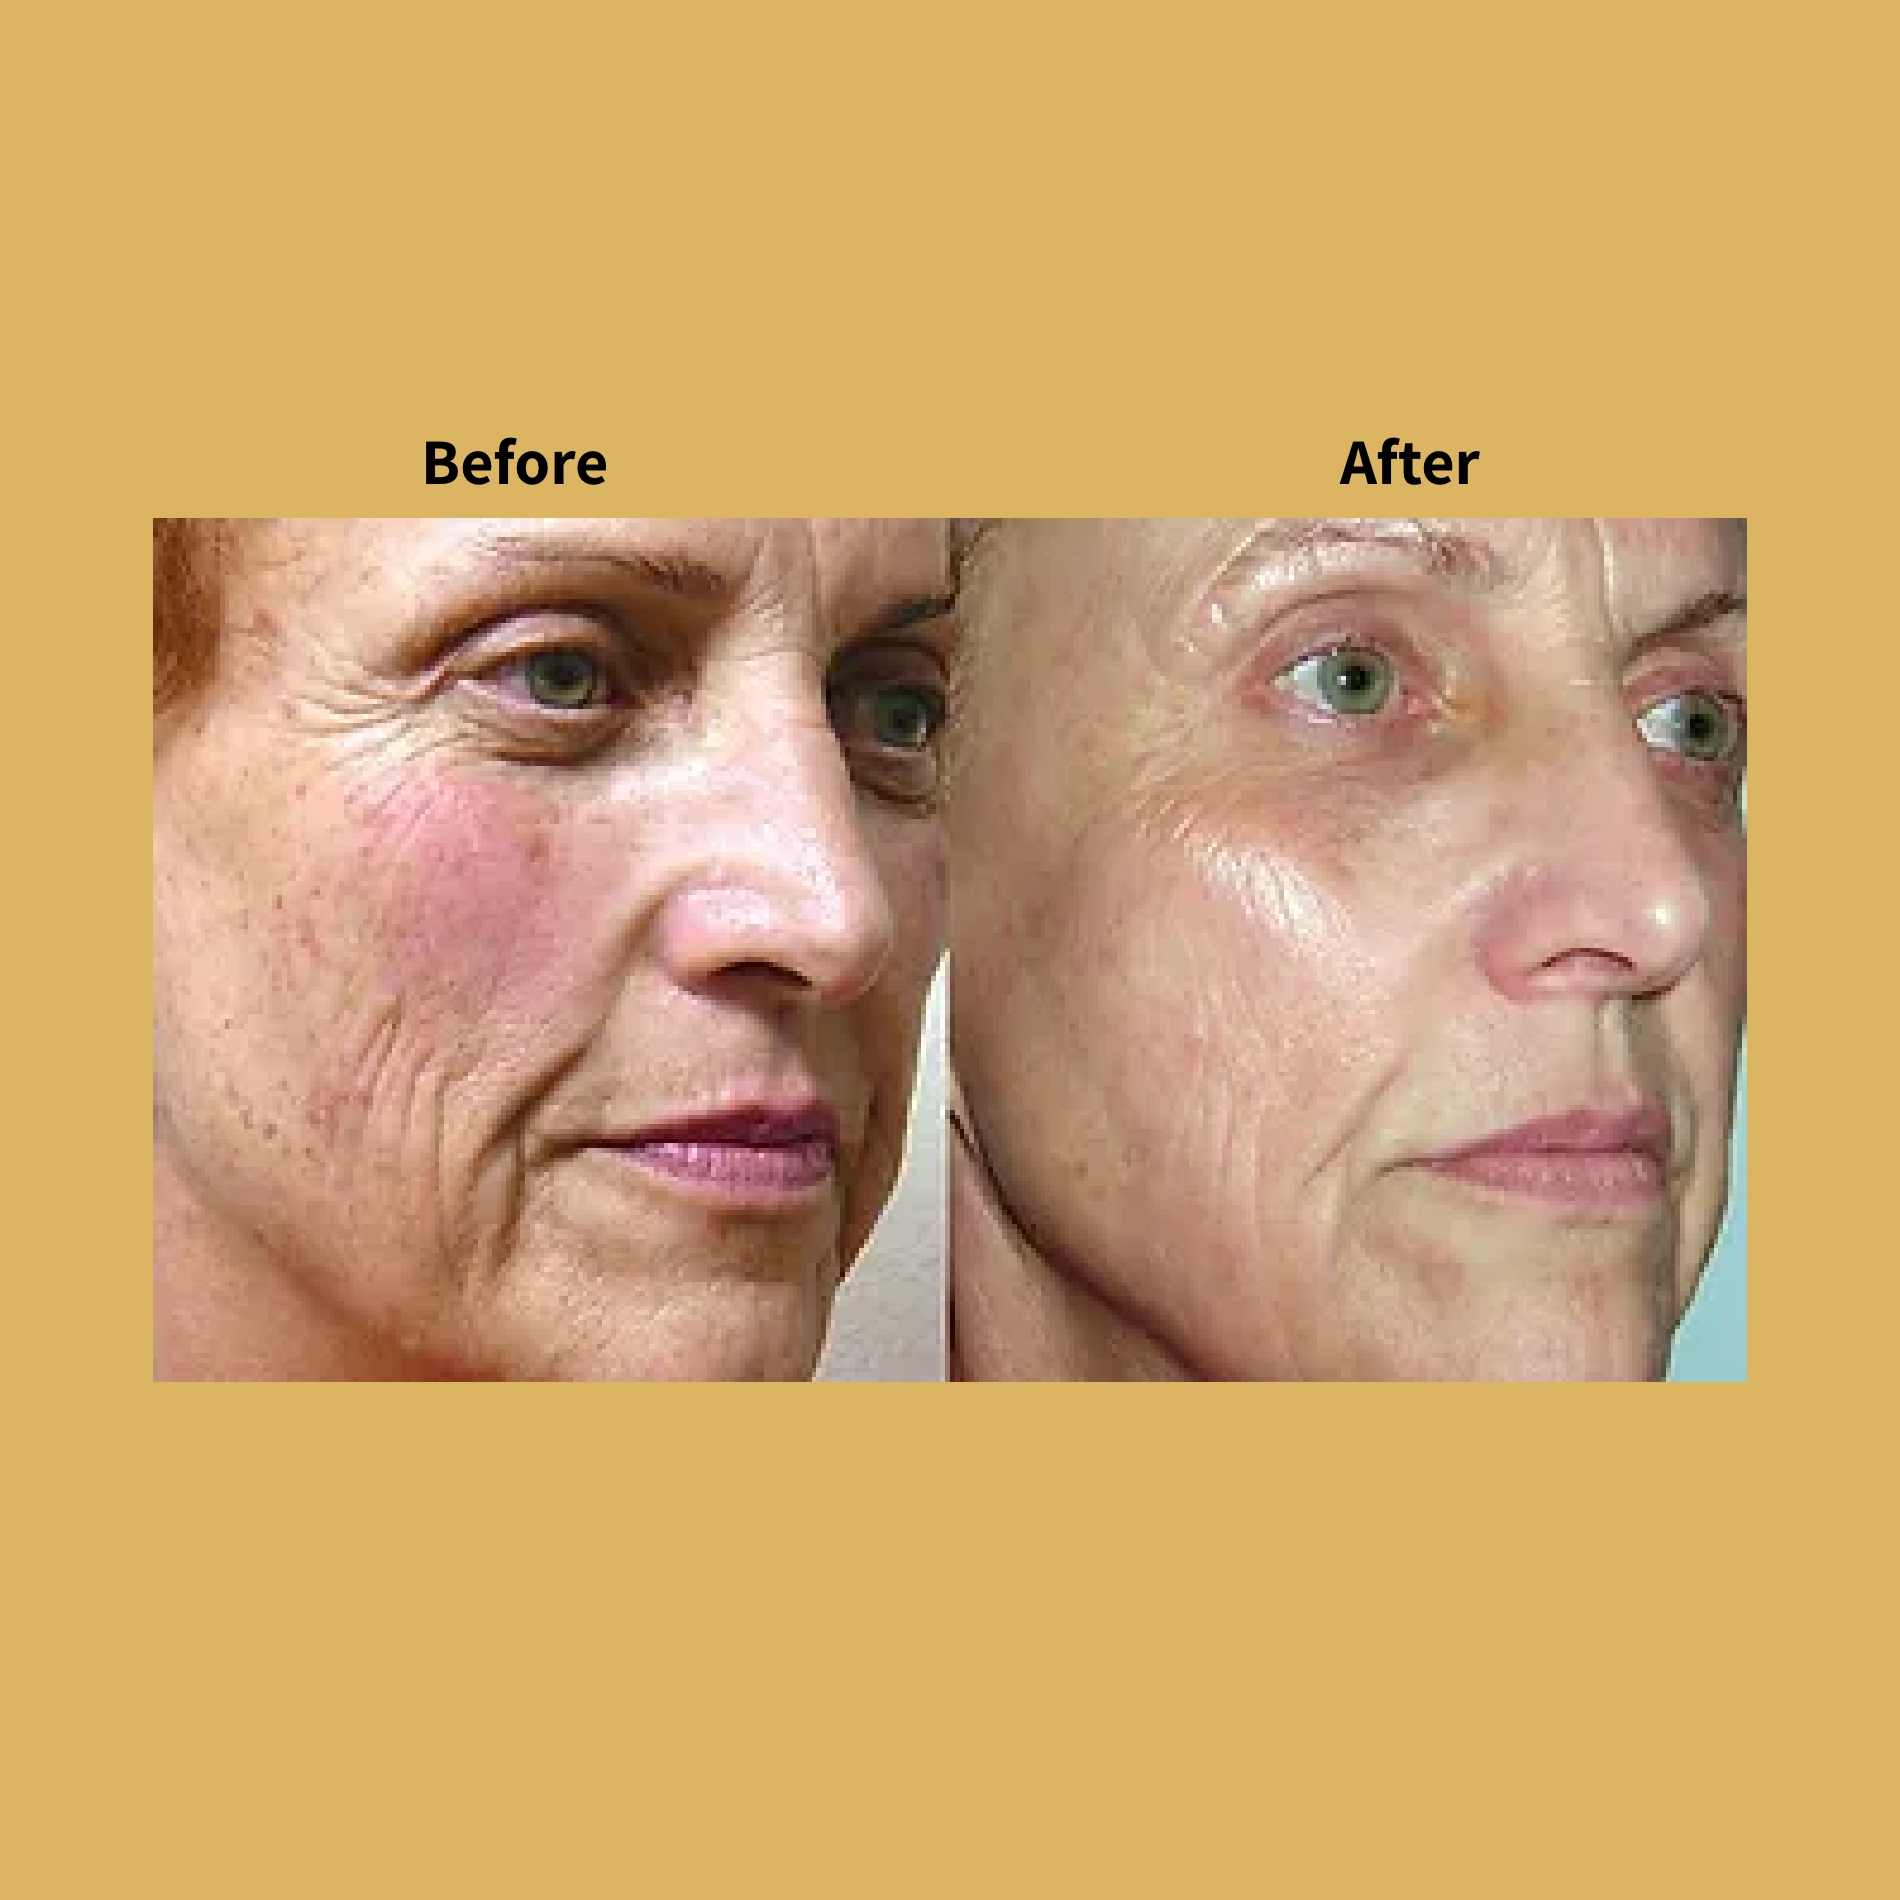 Pixel Perfect Skin Rejuvenation Treatment Before and After Photos | Soleil Medical & Beauty Spa in Portland, OR